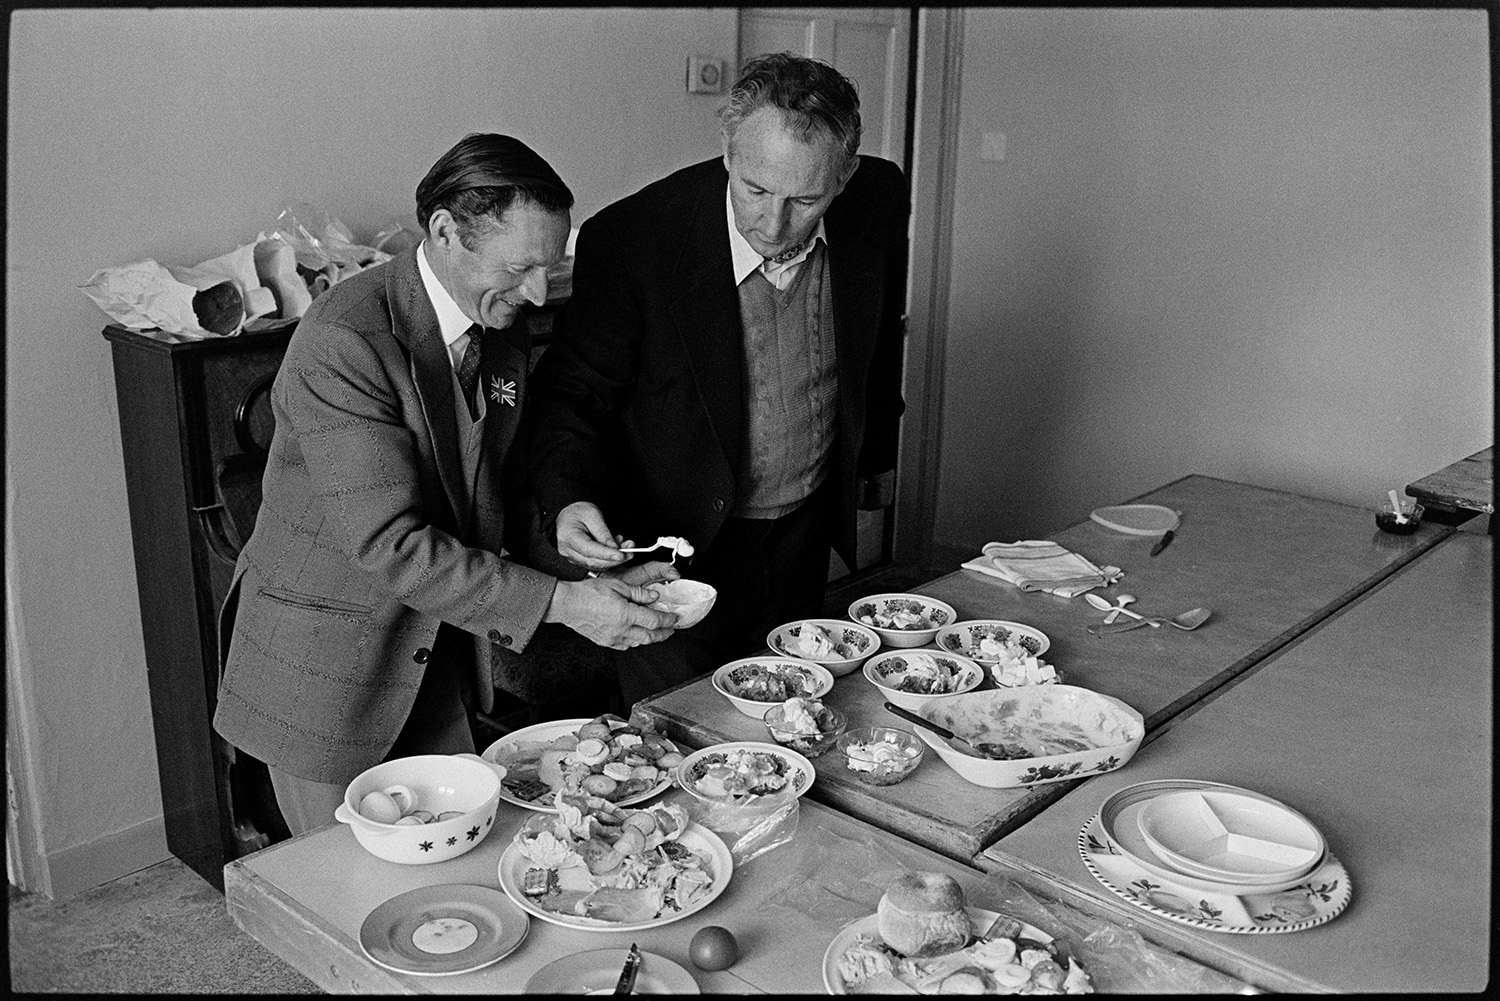 Jubilee lunch in village hall people serving food and eating. 
[Two men adding cream to bowls of desserts on a table in Atherington Village Hall, at a lunch to celebrate the Silver Jubilee of Queen Elizabeth II. Other plates with salads and bread rolls can also be seen on the table.]